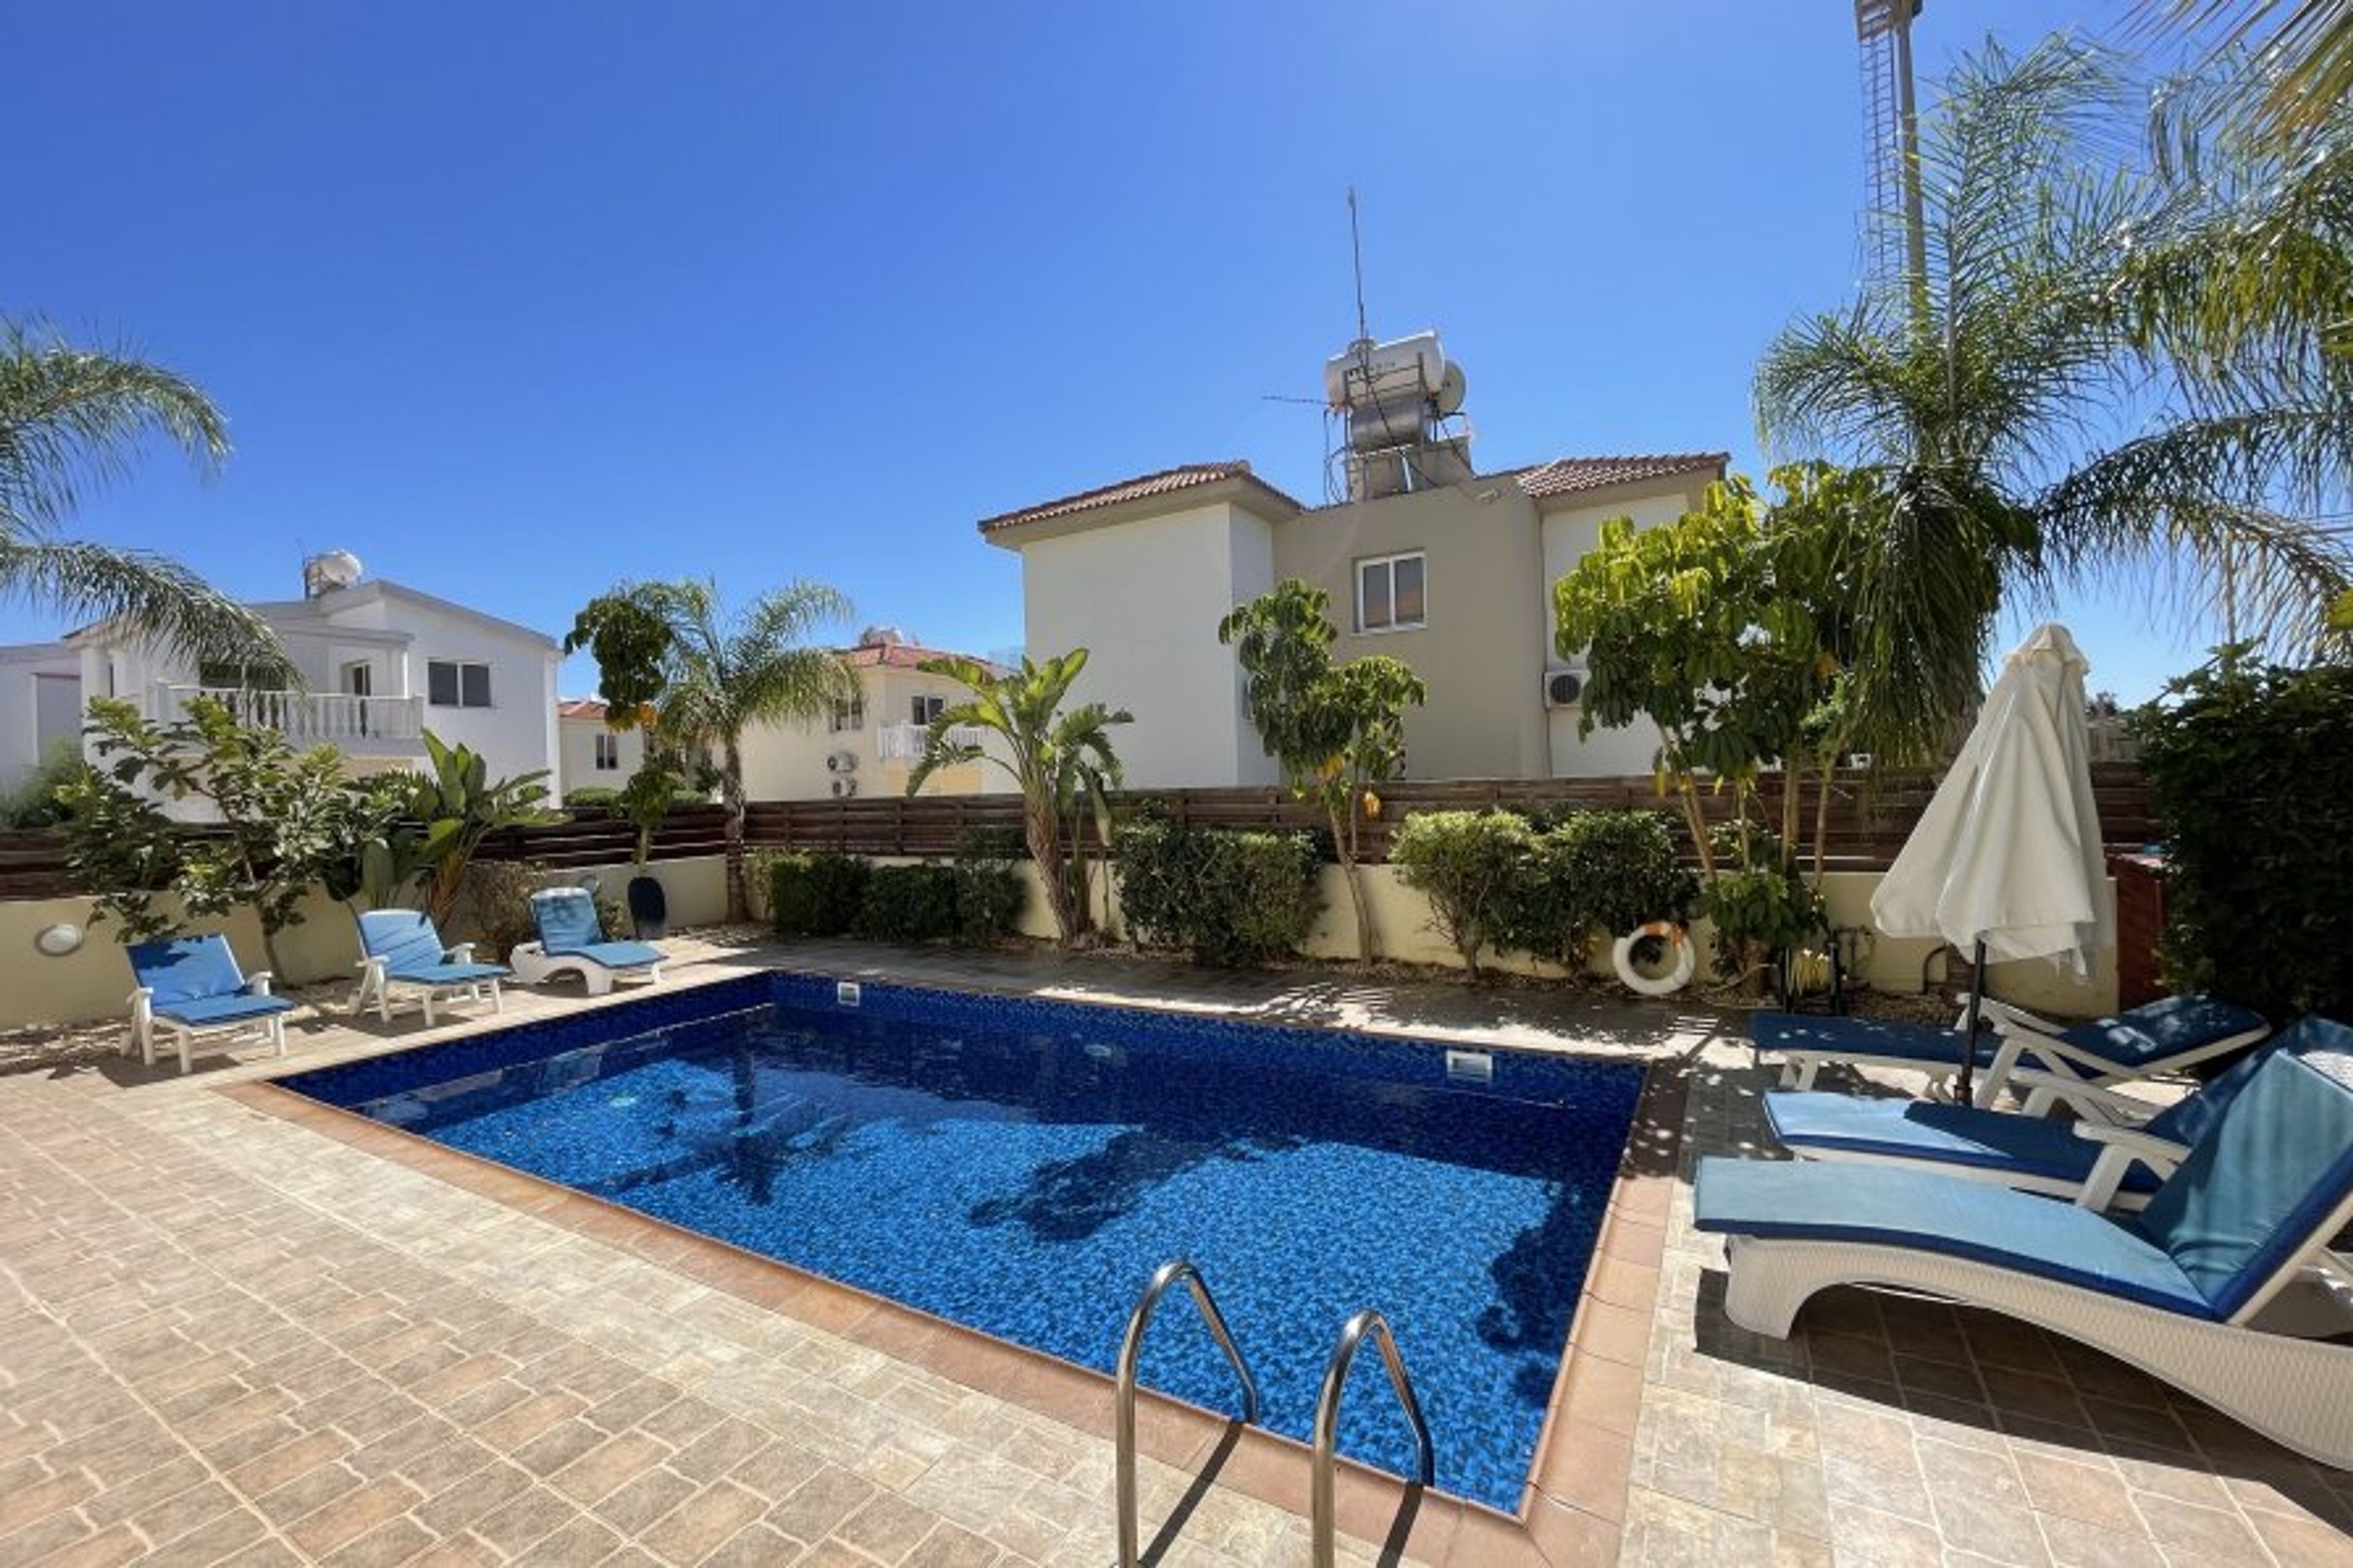 Nissi Golden Sands 3 Bedroom villa with private pool, Ayia Napa.
